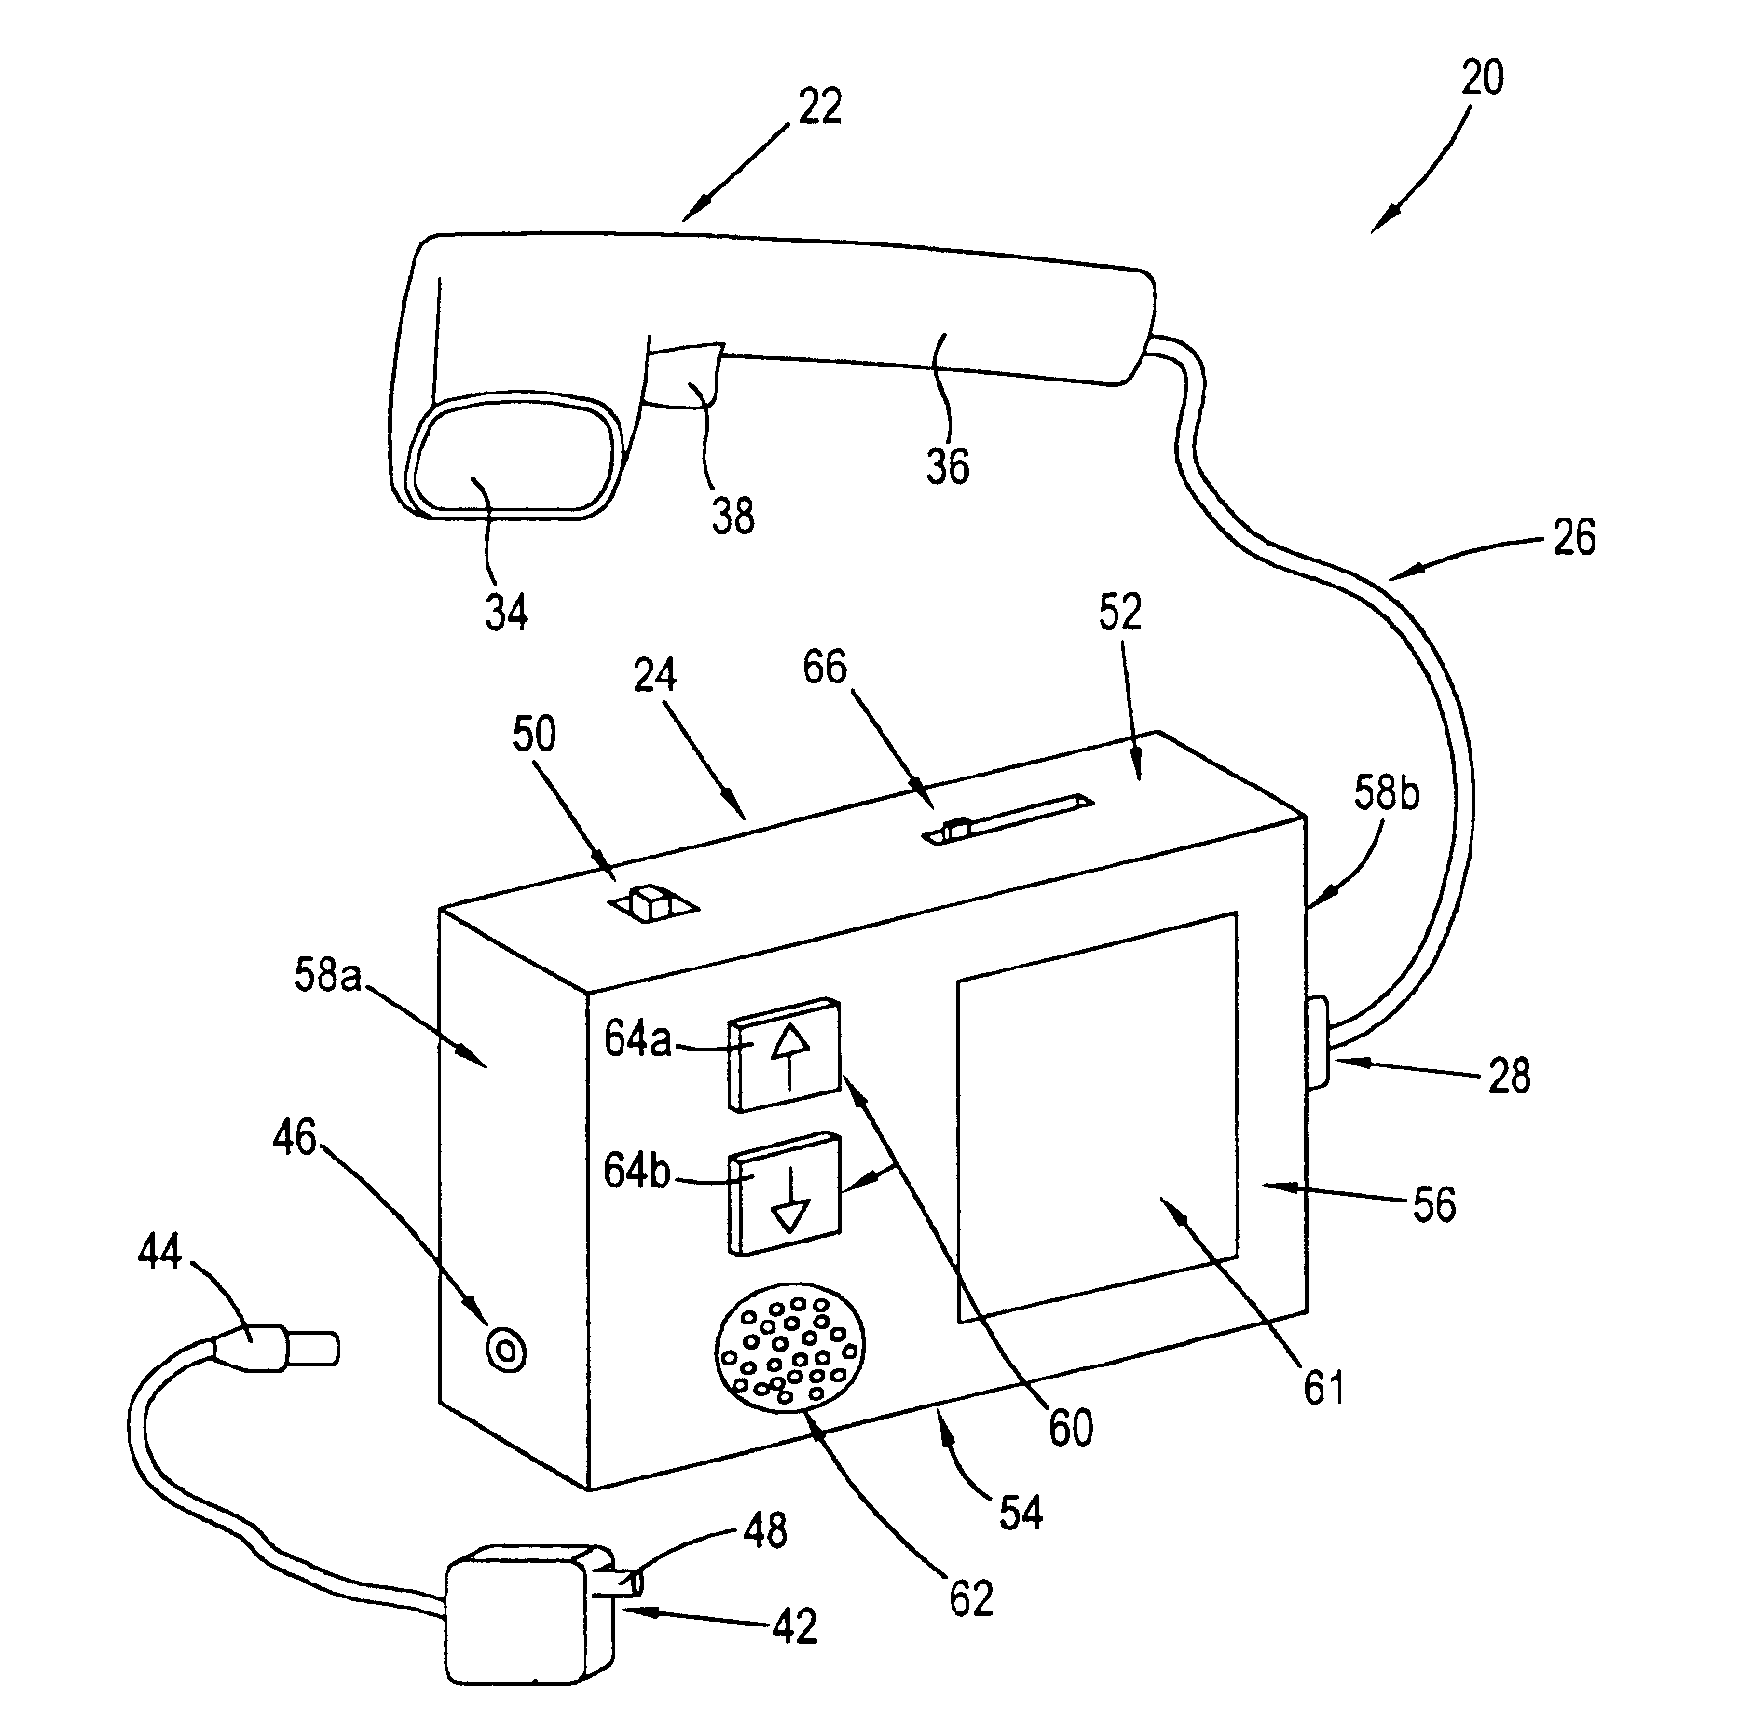 Apparatus and method for information challenged persons to determine information regarding pharmaceutical container labels